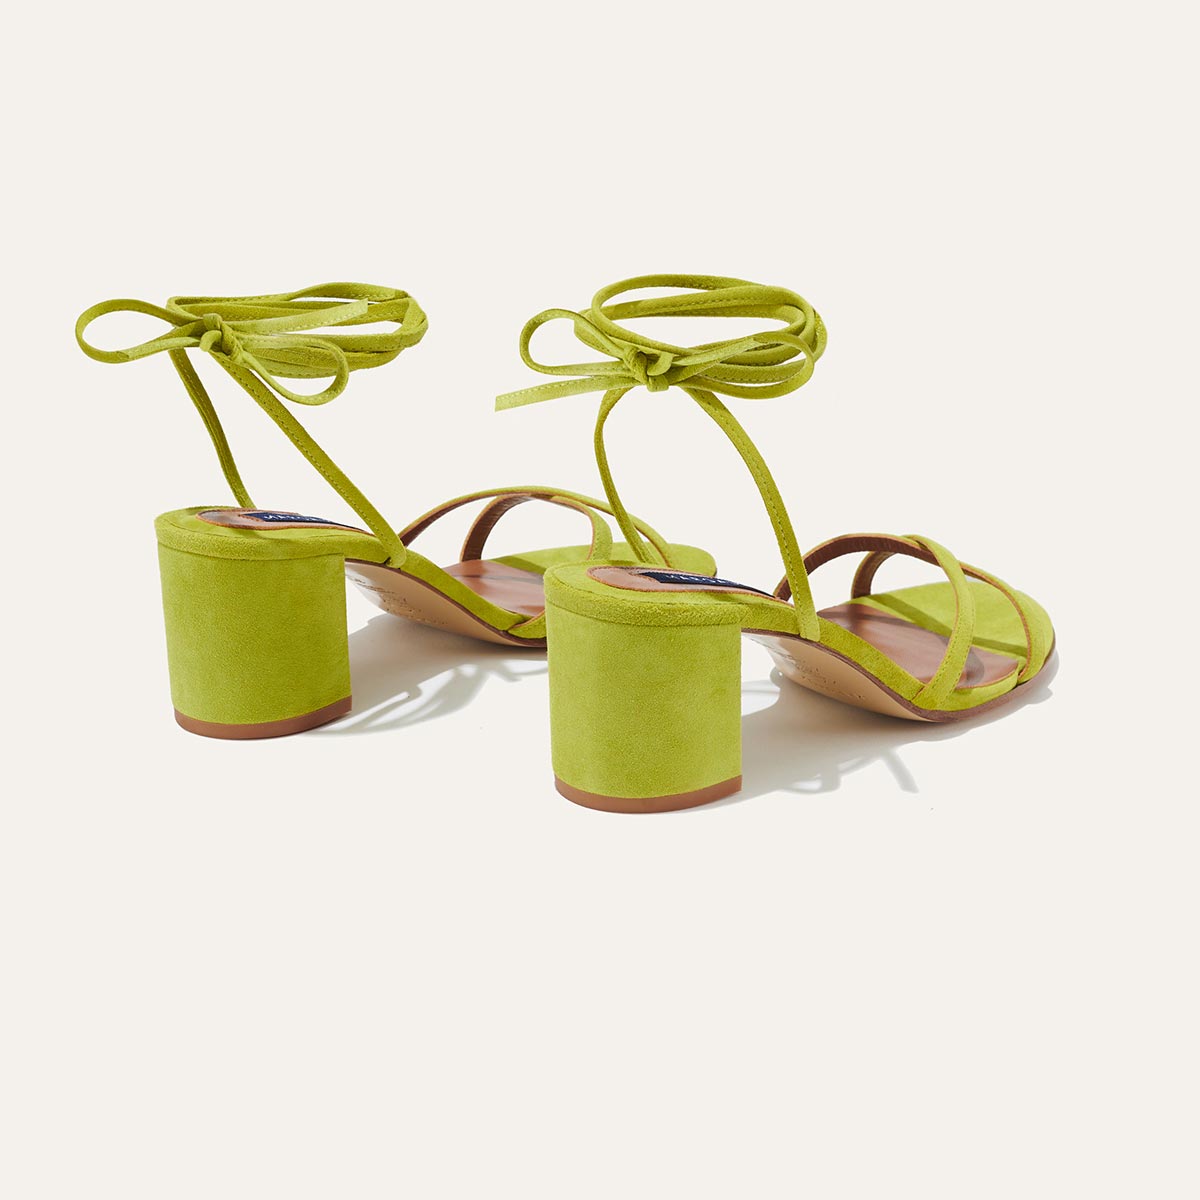 The Soho Sandal - Chartreuse Suede